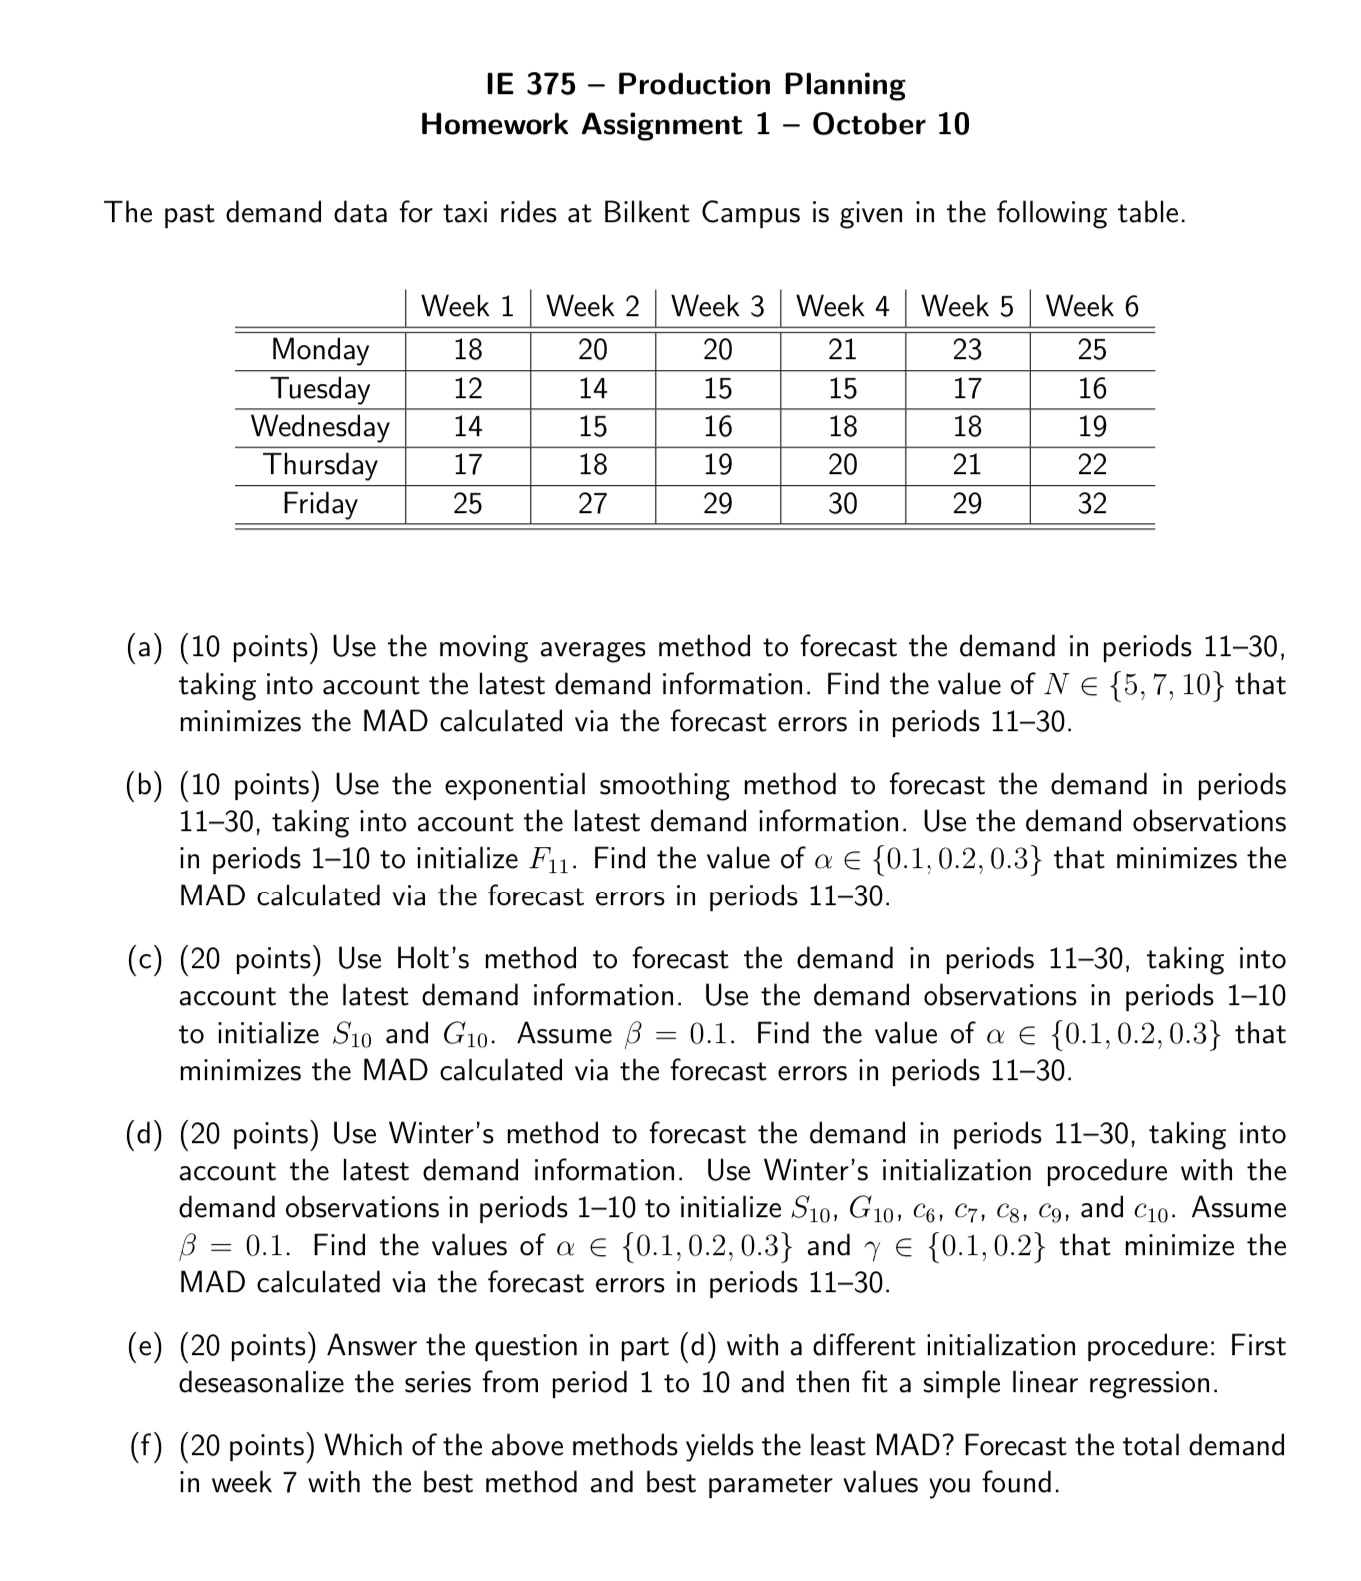 IE 375 - Production Planning Homework Assignment 1 - October 10 The past demand data for taxi rides at